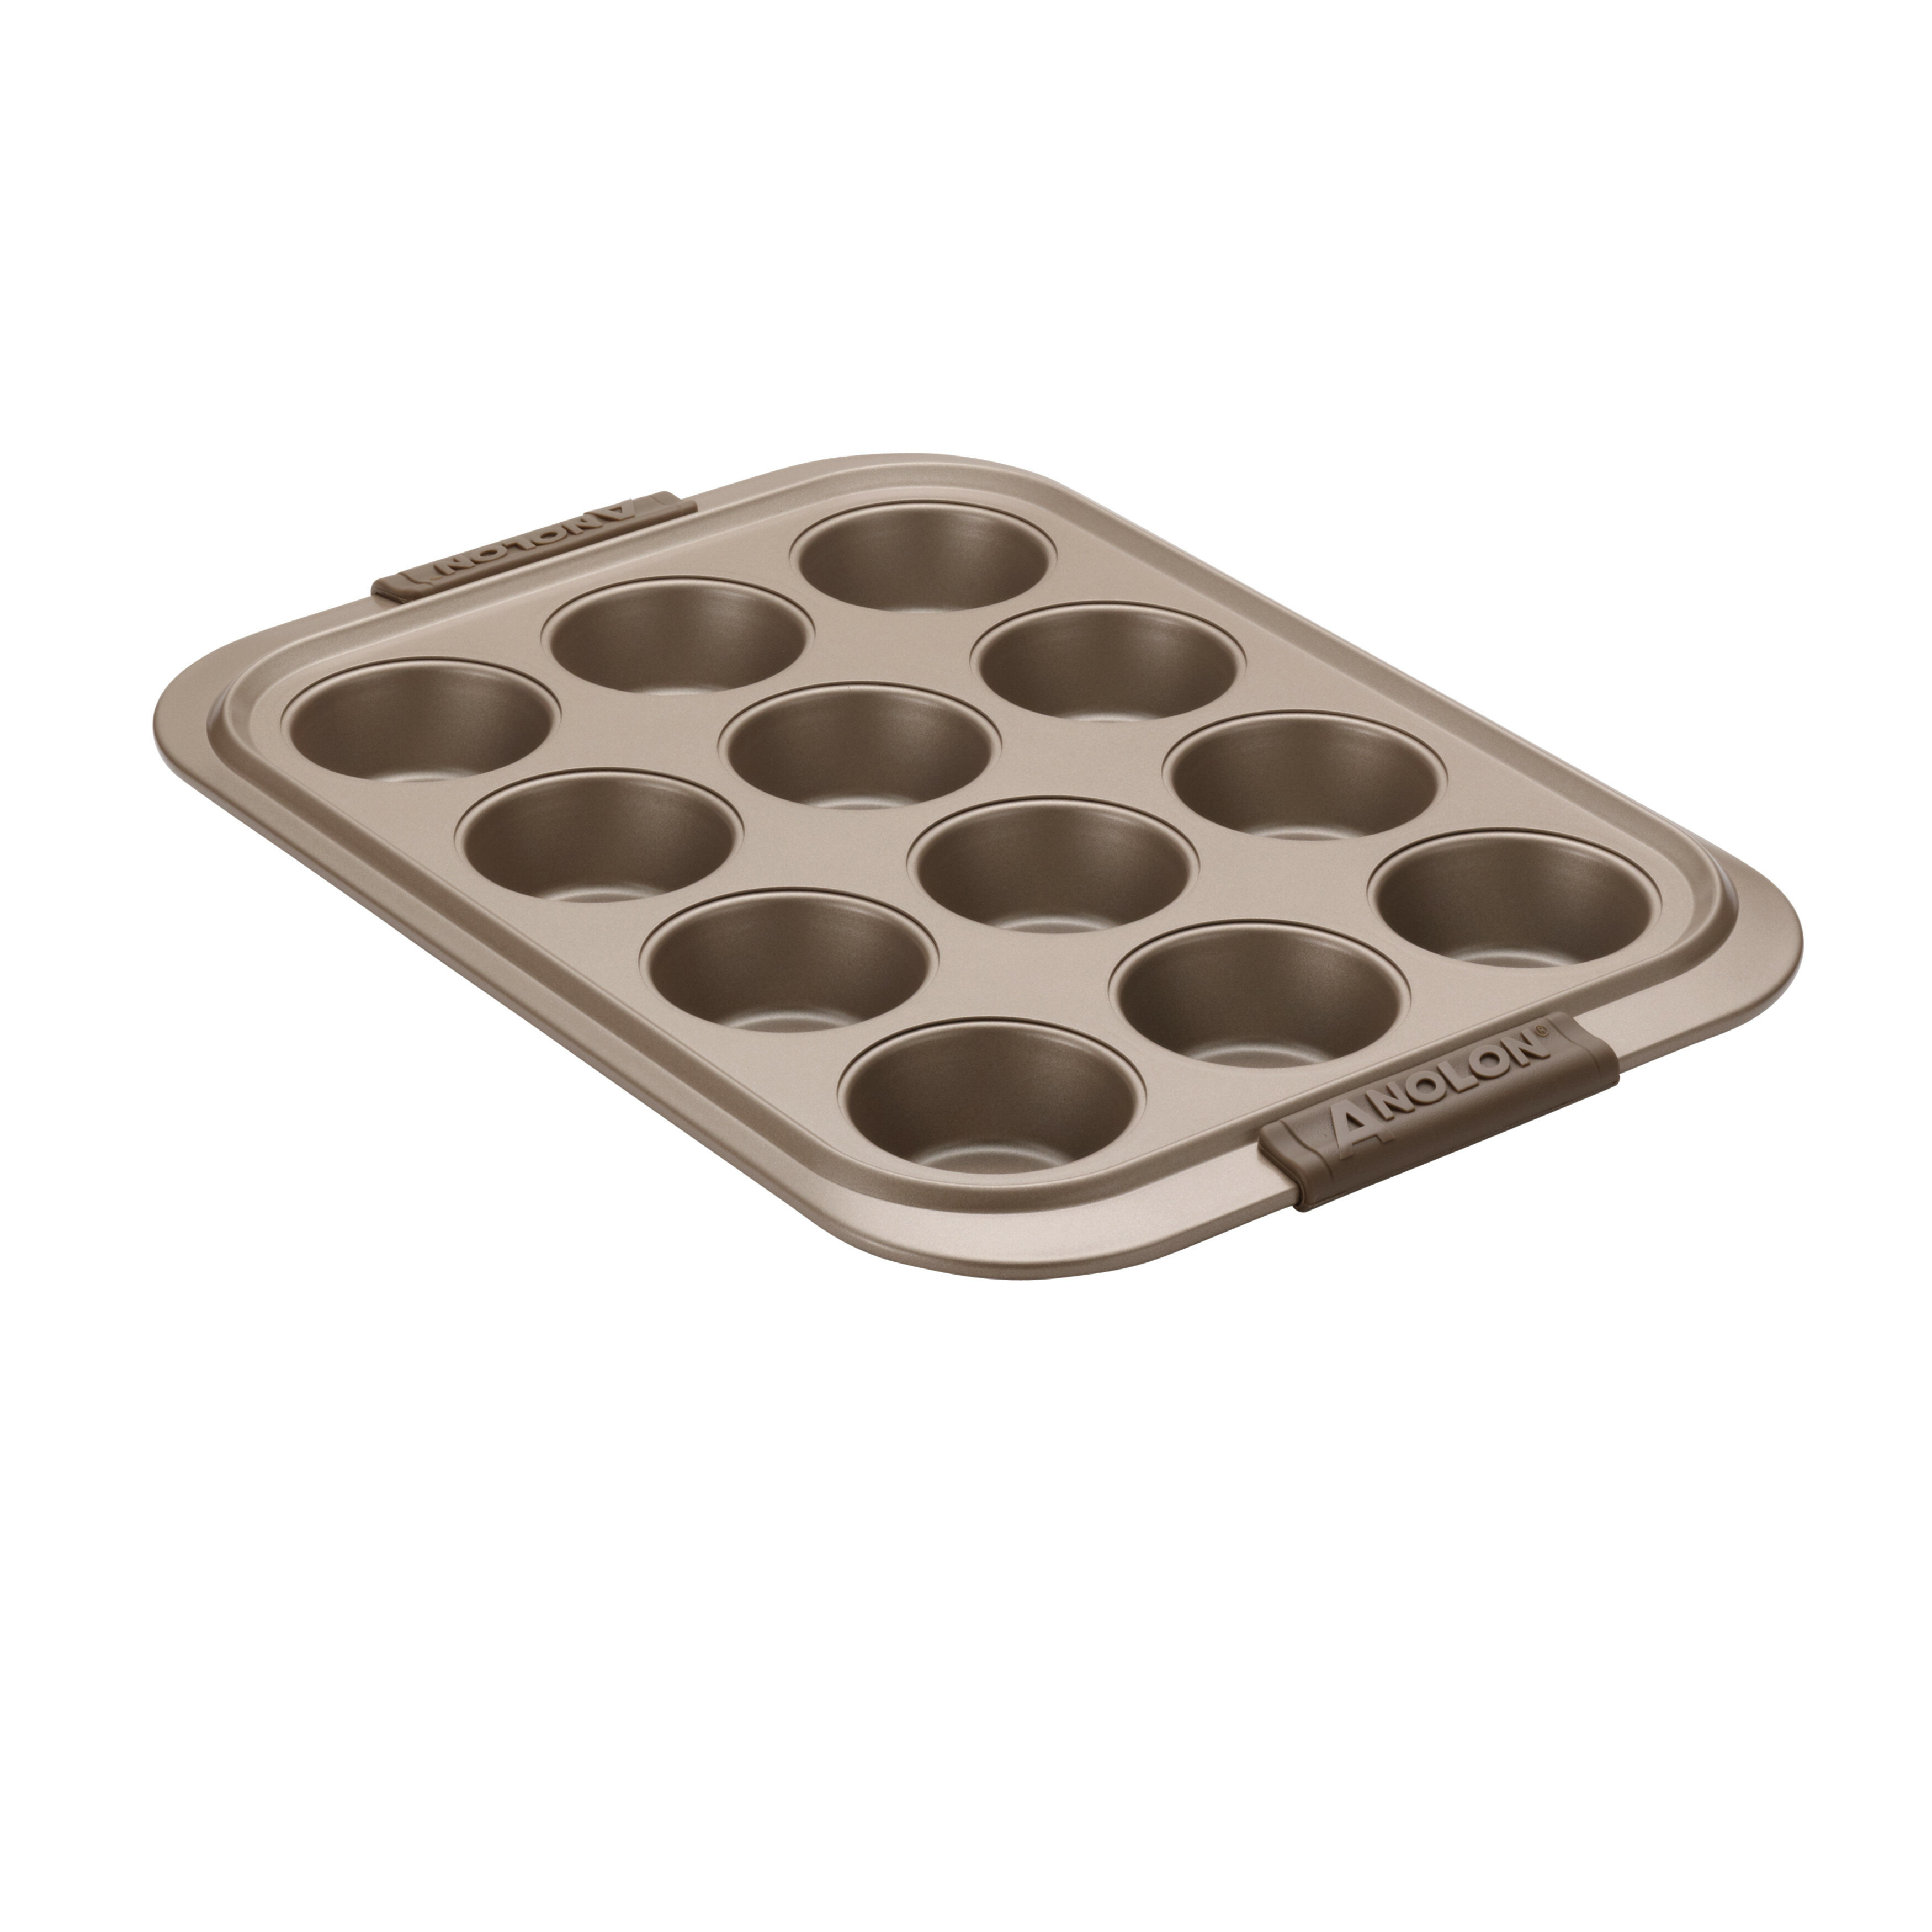 Anolon Advanced Bakeware Nonstick Cake Pan with Lid and Silicone Grips, 9- inch x 13-inch